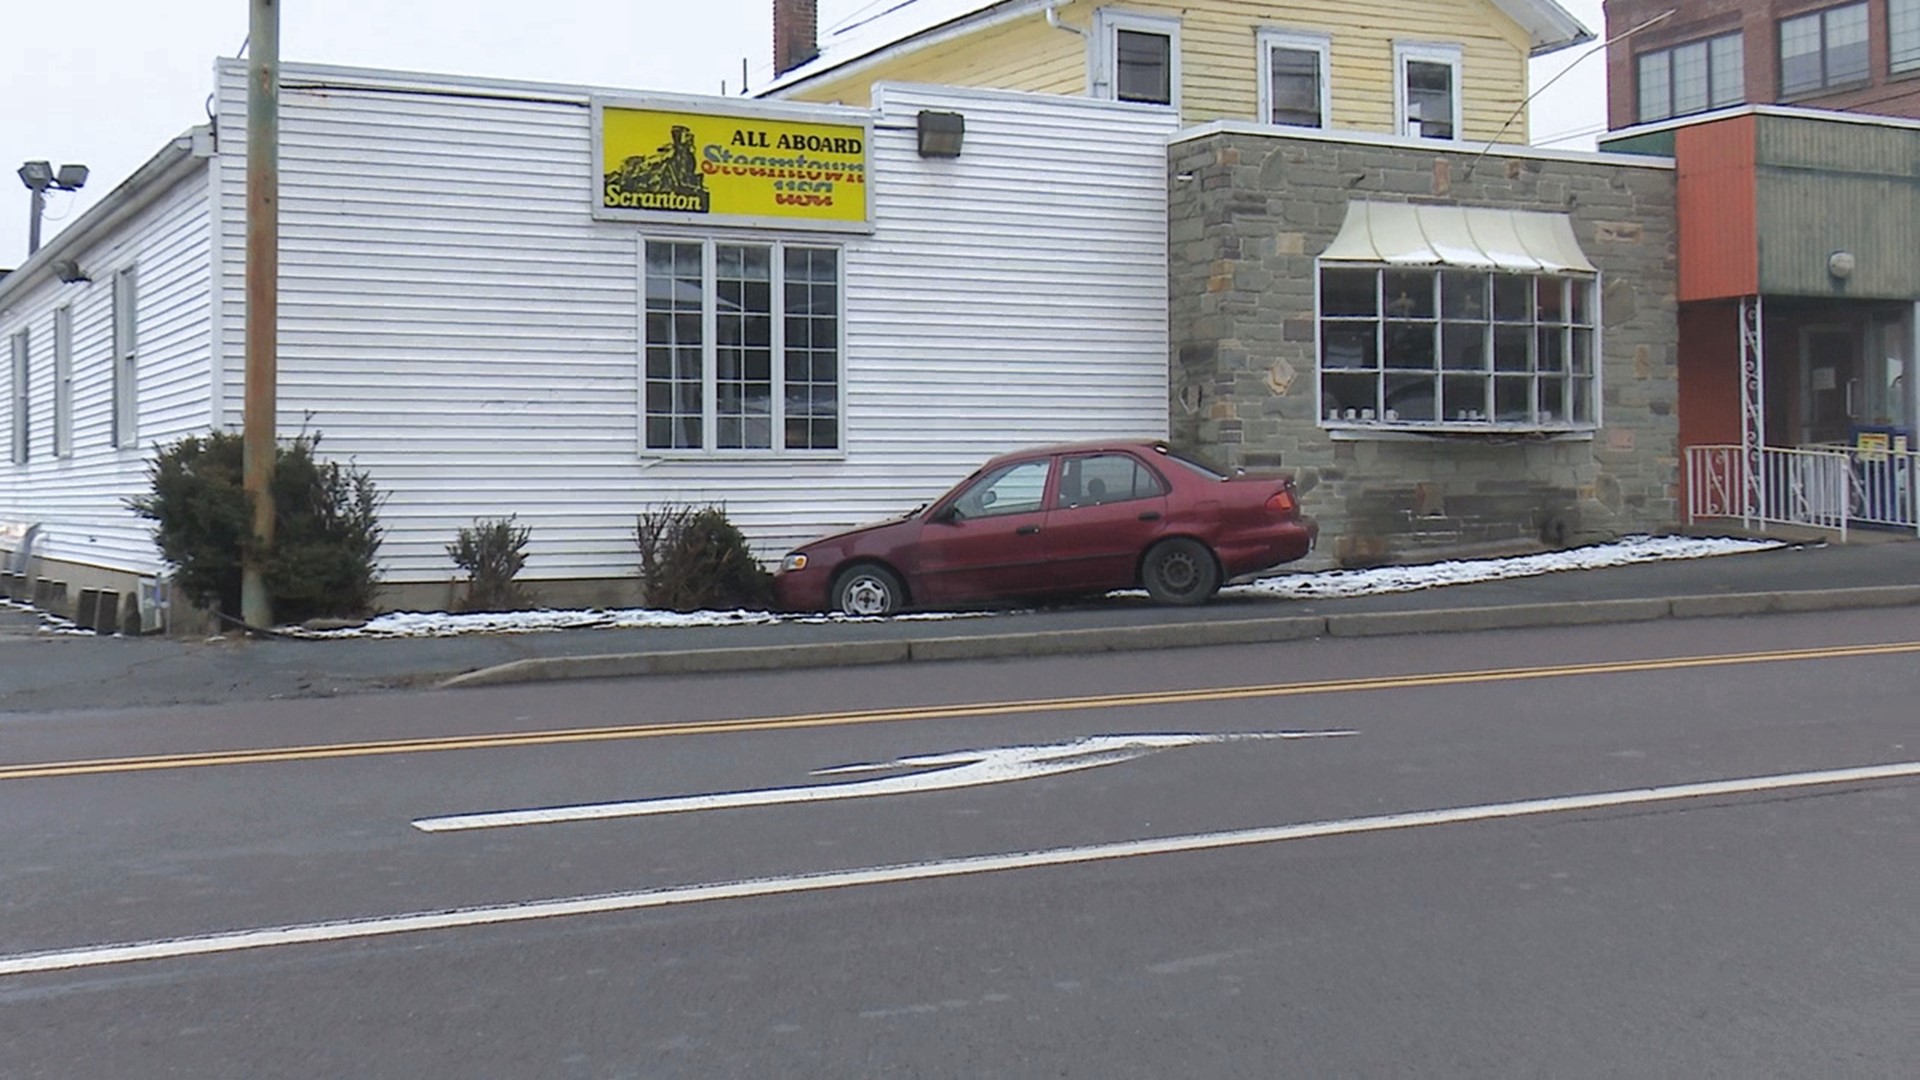 The vehicle hit the side of the All Aboard Steamtown Diner on Cedar Avenue in the city's Southside.